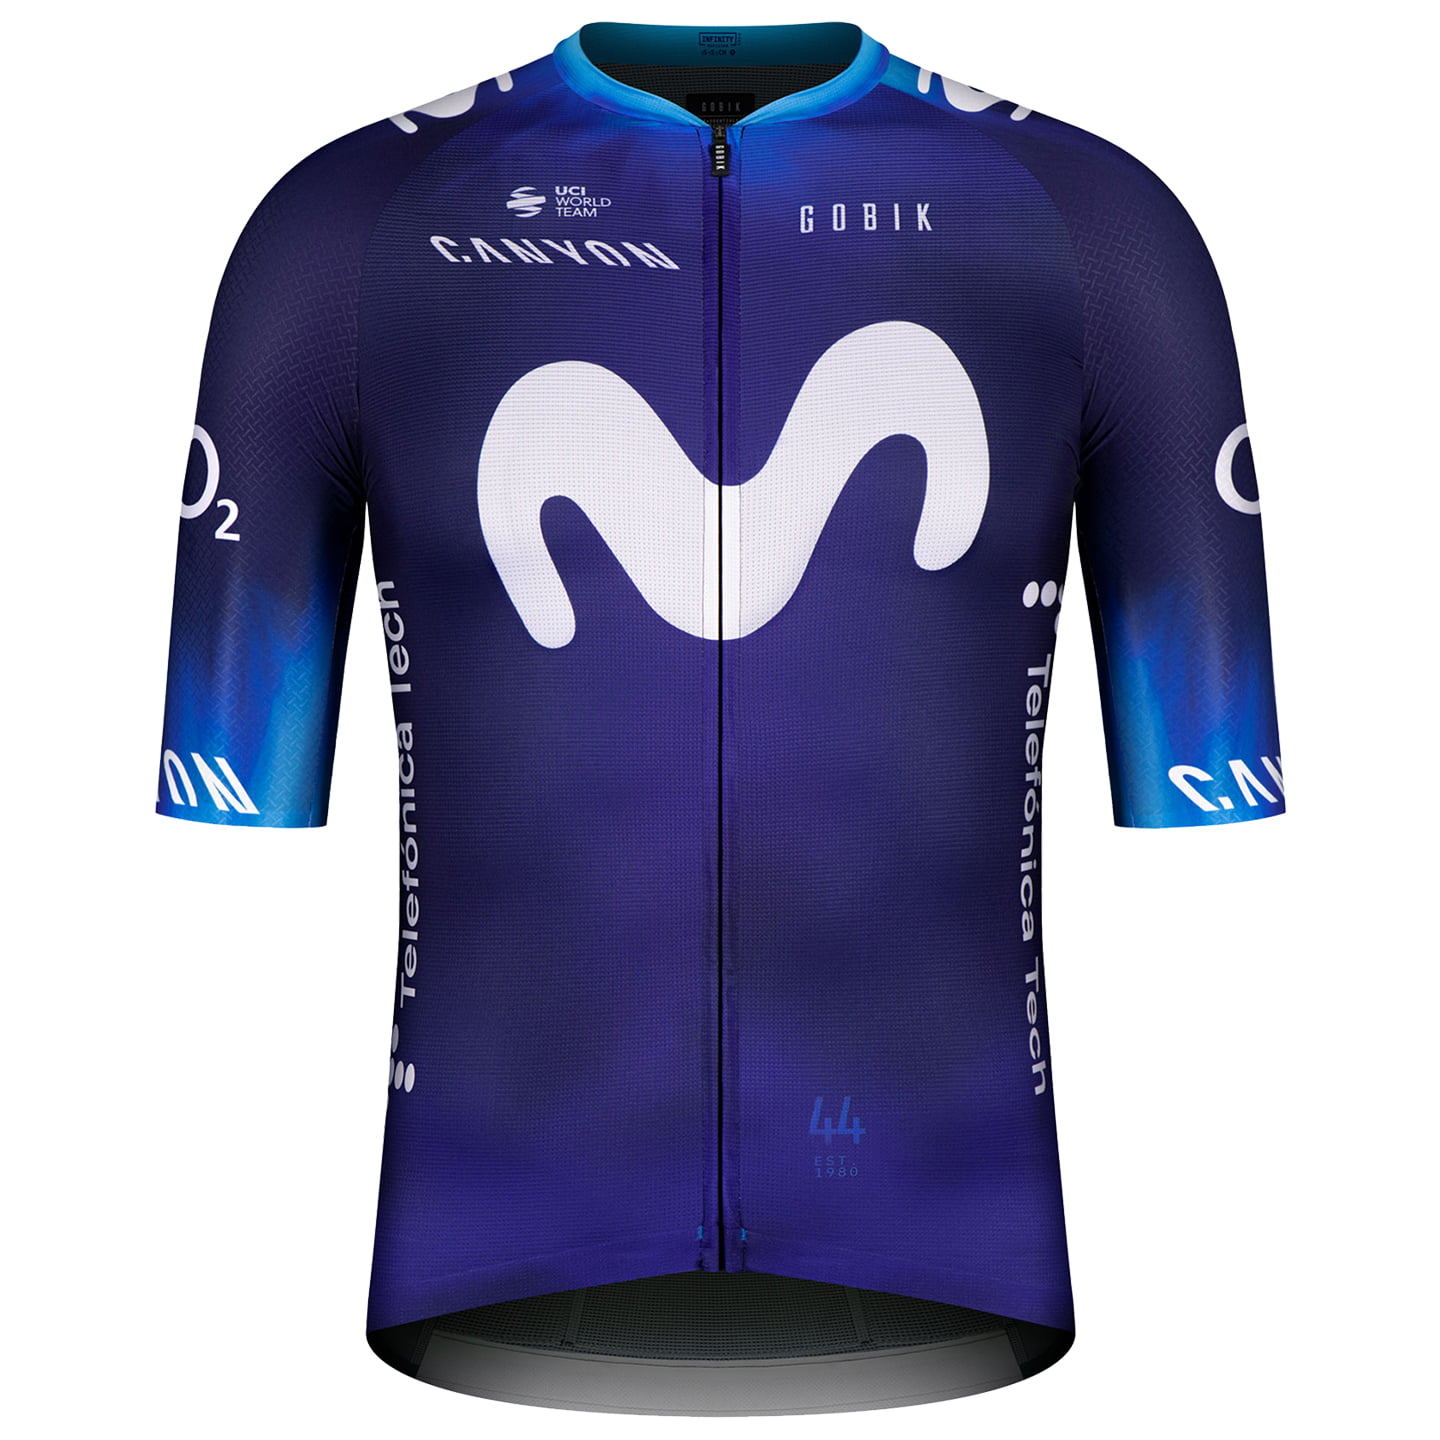 MOVISTAR TEAM Race 2023 Short Sleeve Jersey, for men, size S, Cycling jersey, Cycling clothing